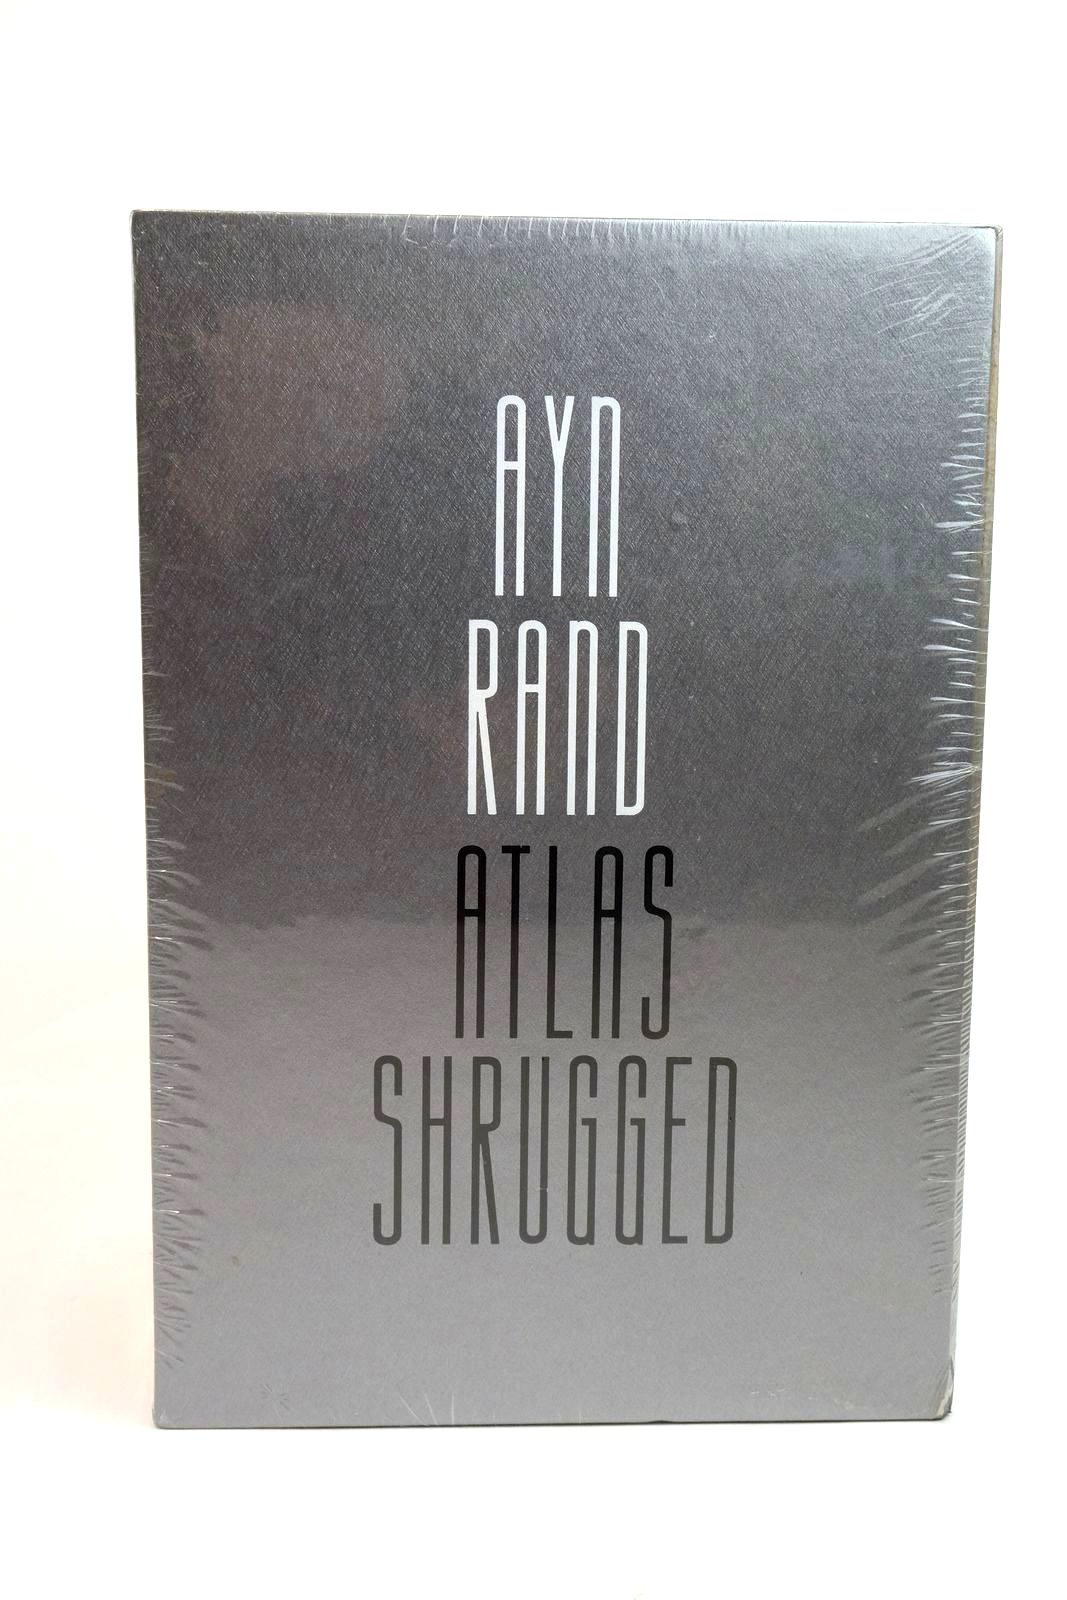 Photo of ATLAS SHRUGGED (THREE VOLUMES) written by Rand, Ayn illustrated by Balbusso, Elena
Balbusso, Anna published by Folio Society (STOCK CODE: 1322335)  for sale by Stella & Rose's Books